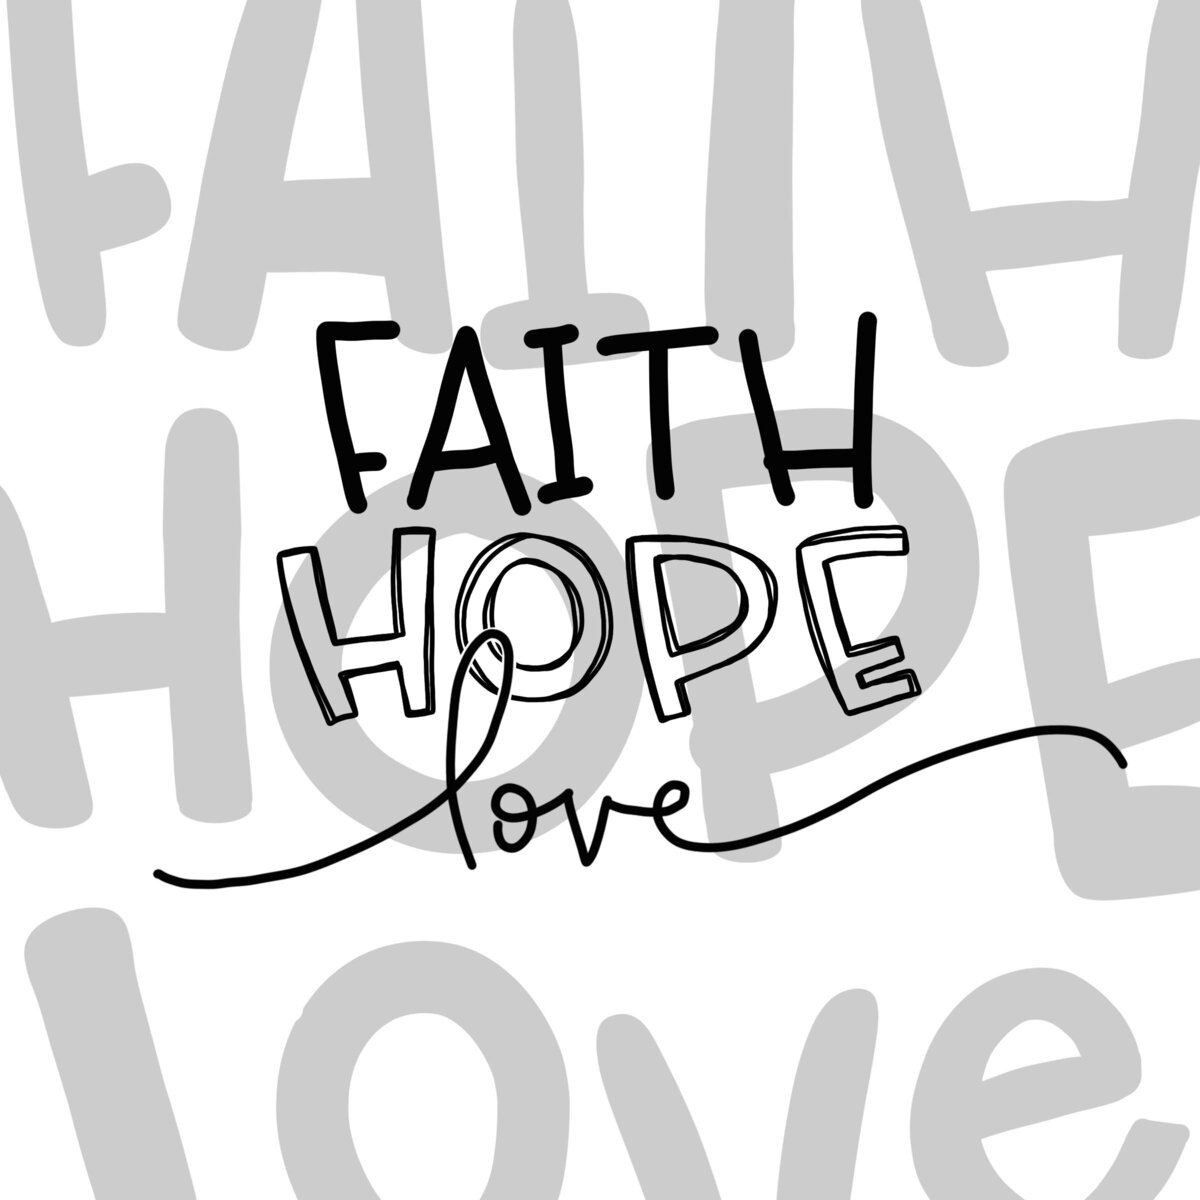 faith hope love typography design by Nancy Ingersoll